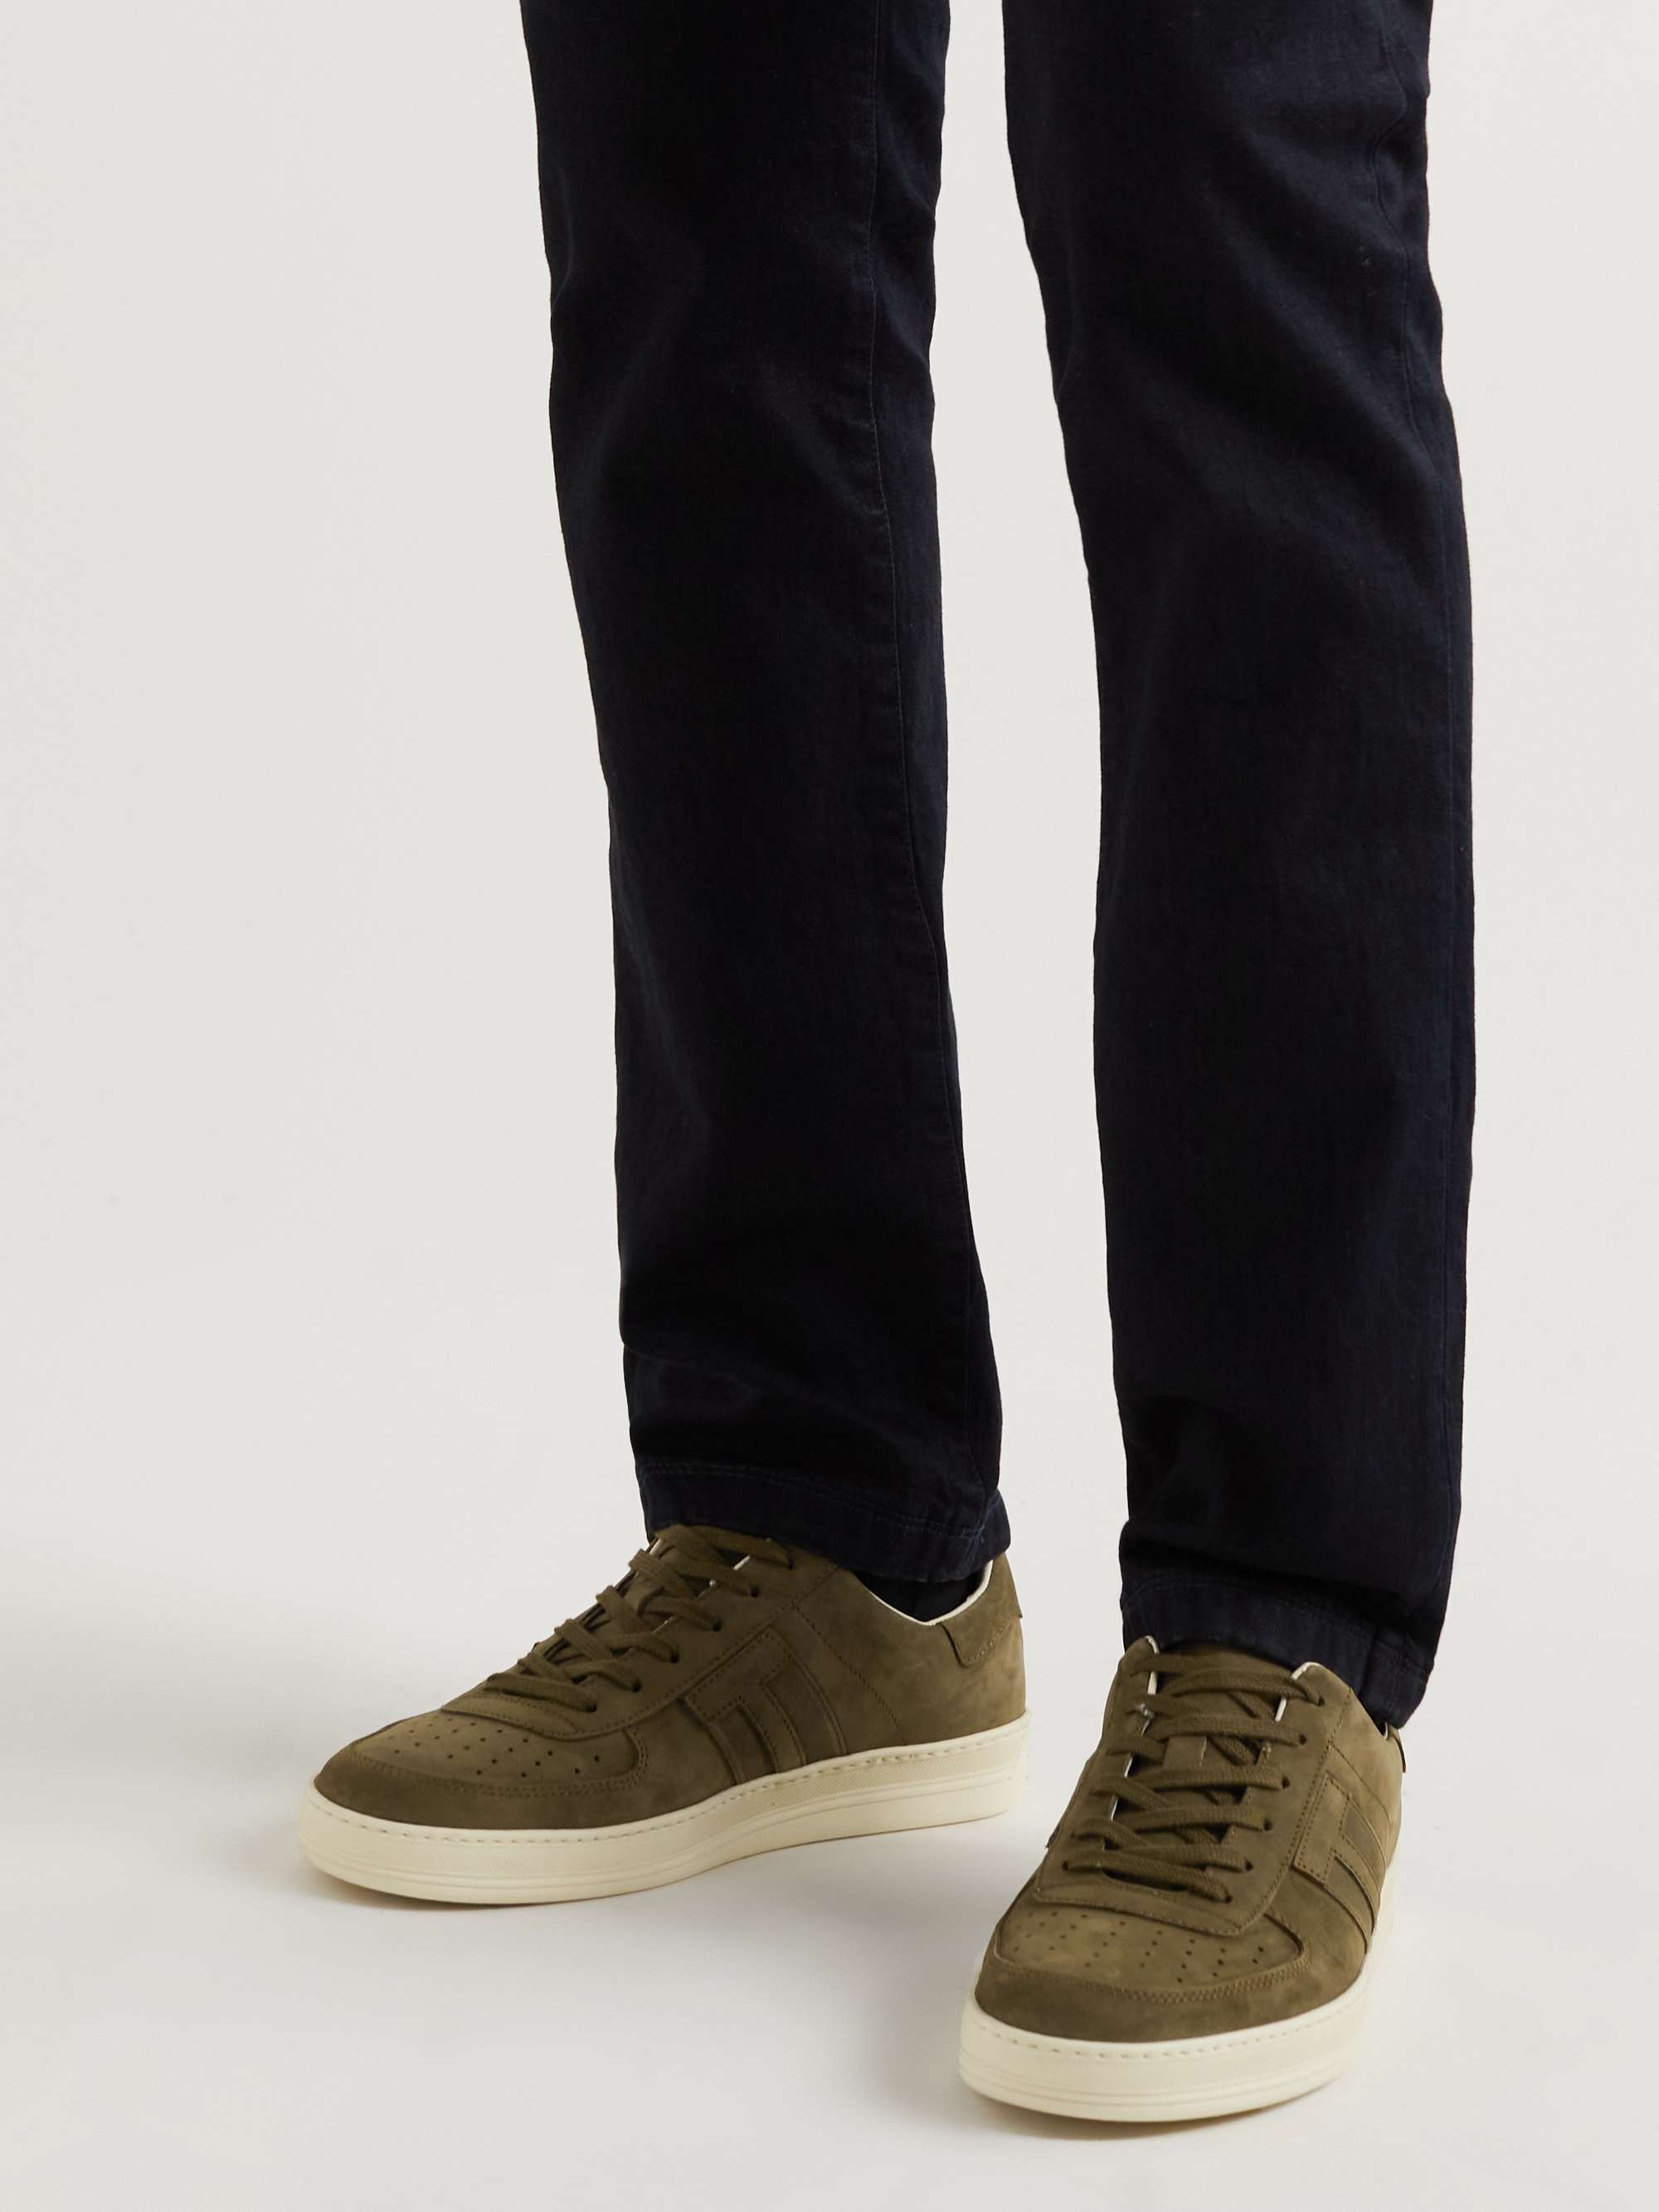 TOM FORD Radcliffe Perforated Nubuck Sneakers